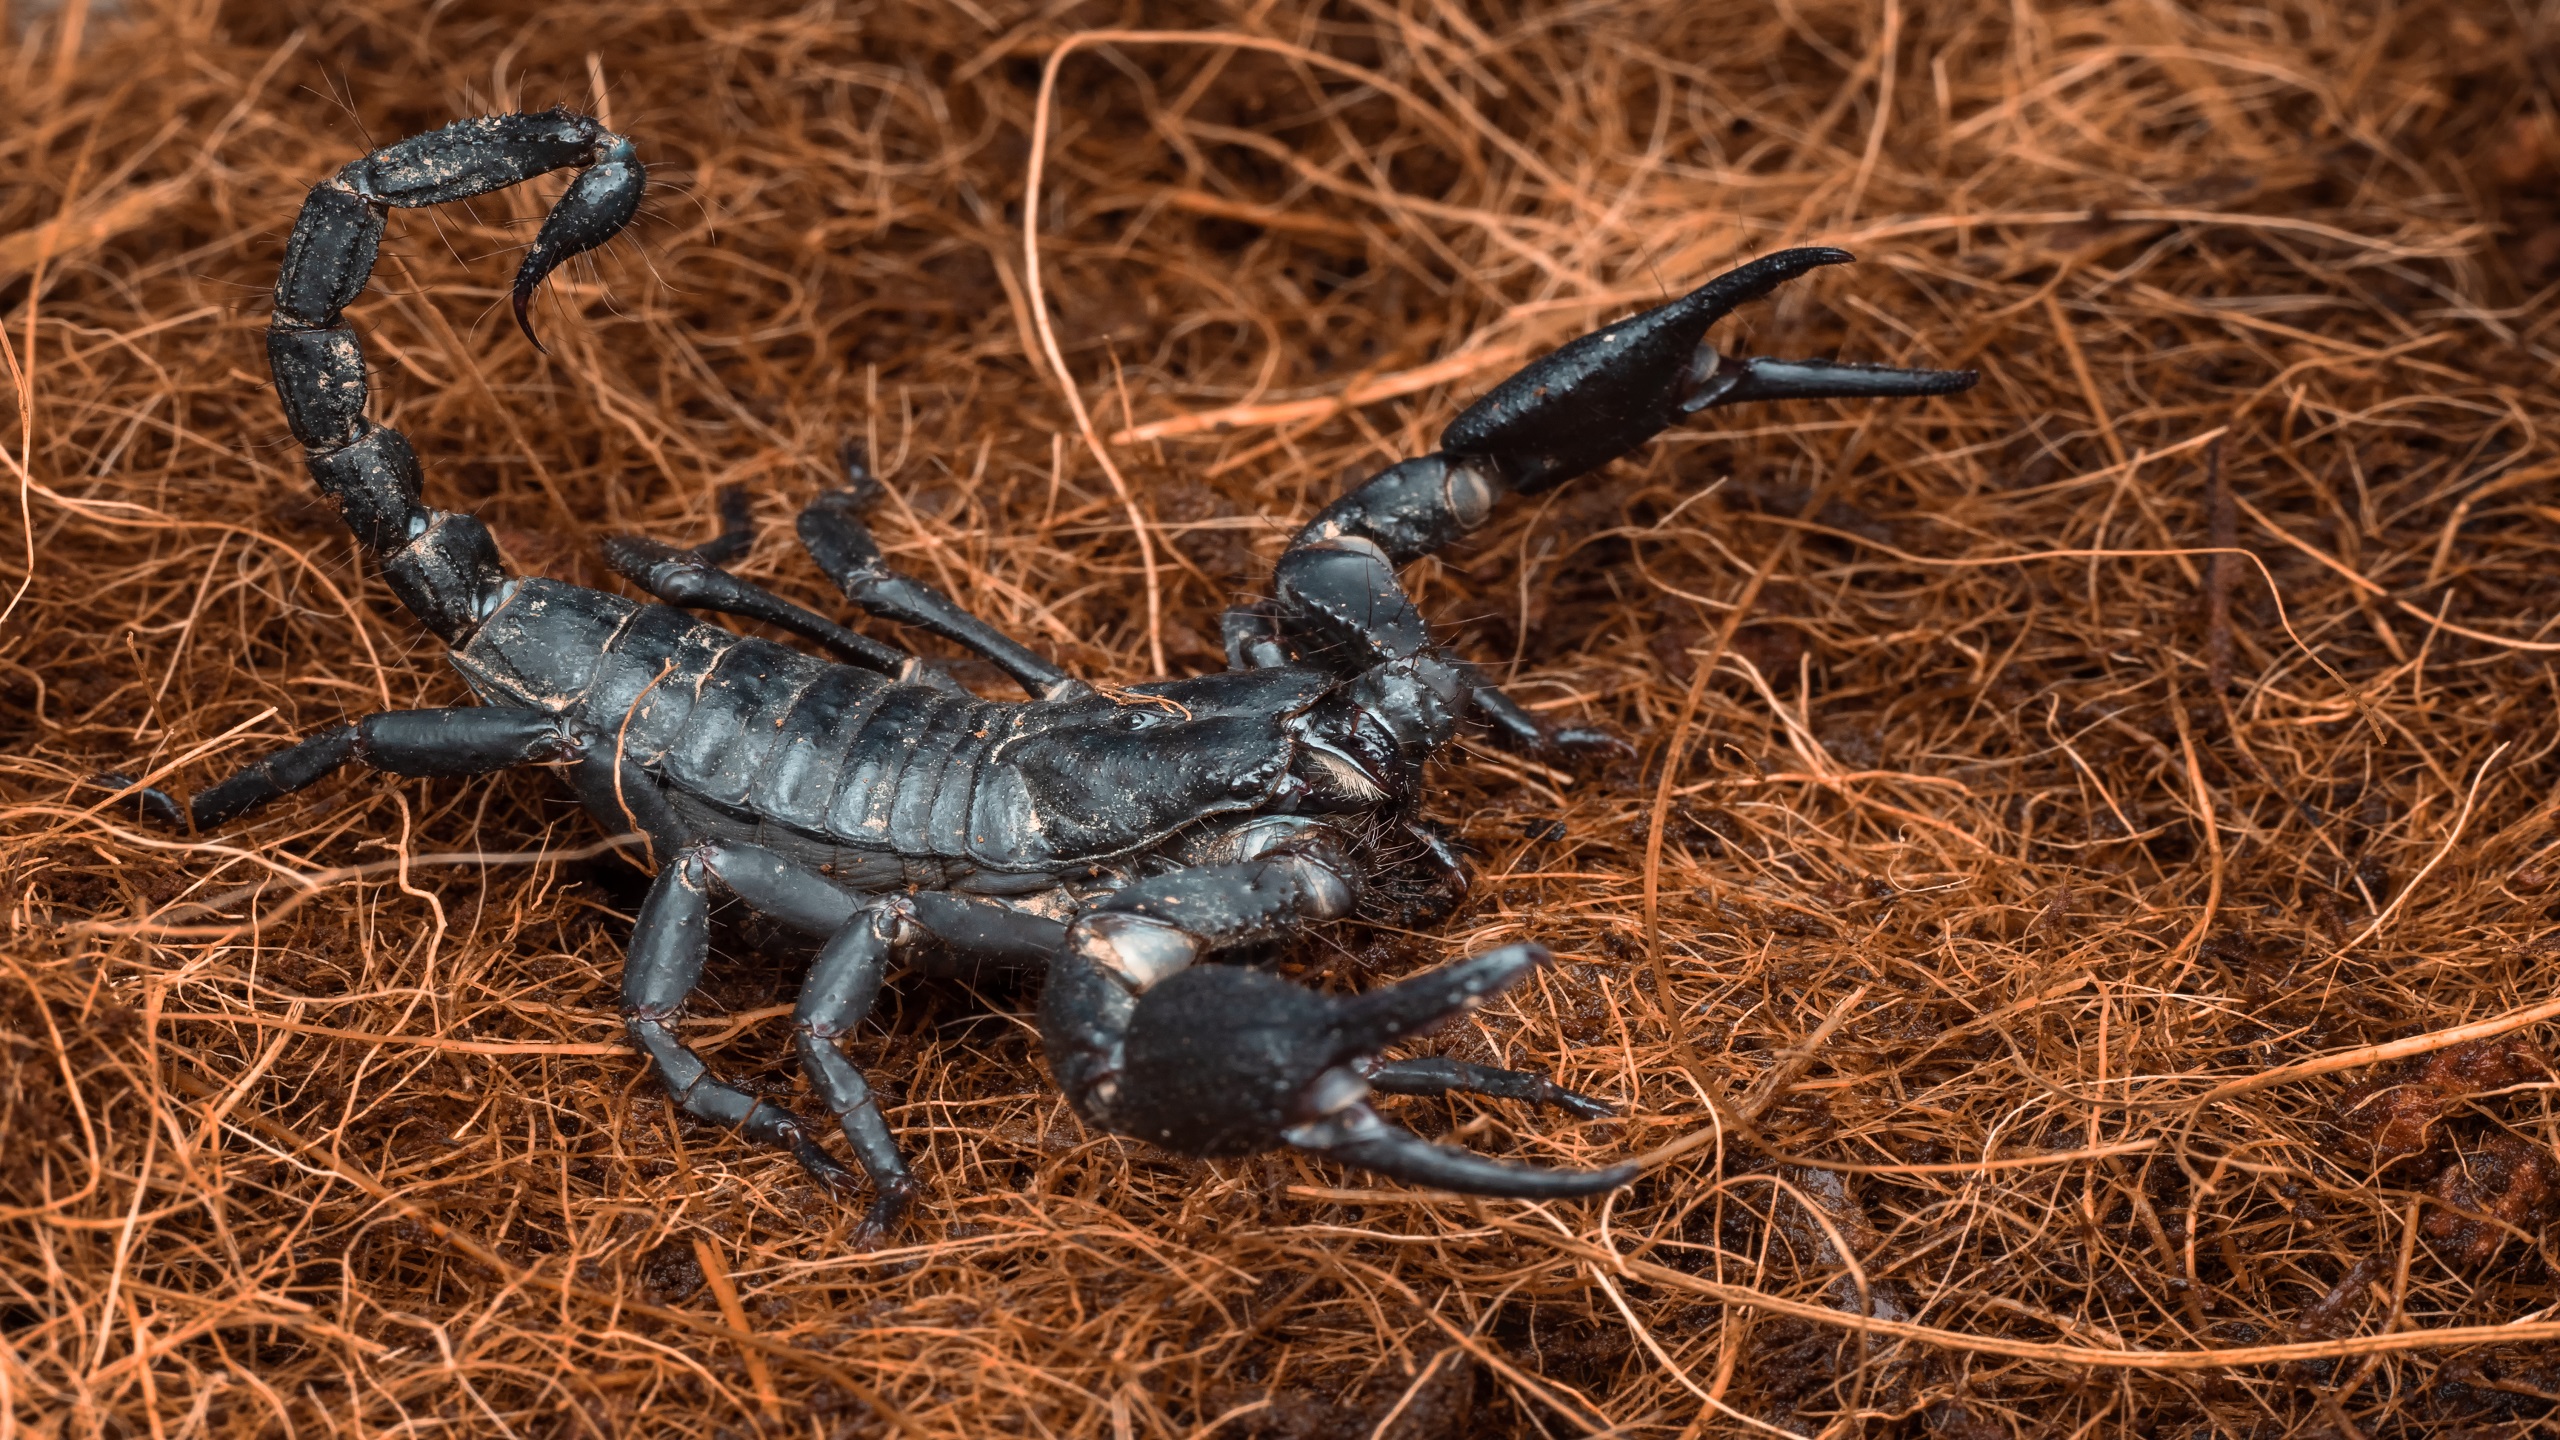 Nearly 33,000 Scorpion Stings, 15 Related Deaths Reported in Iran Last Year